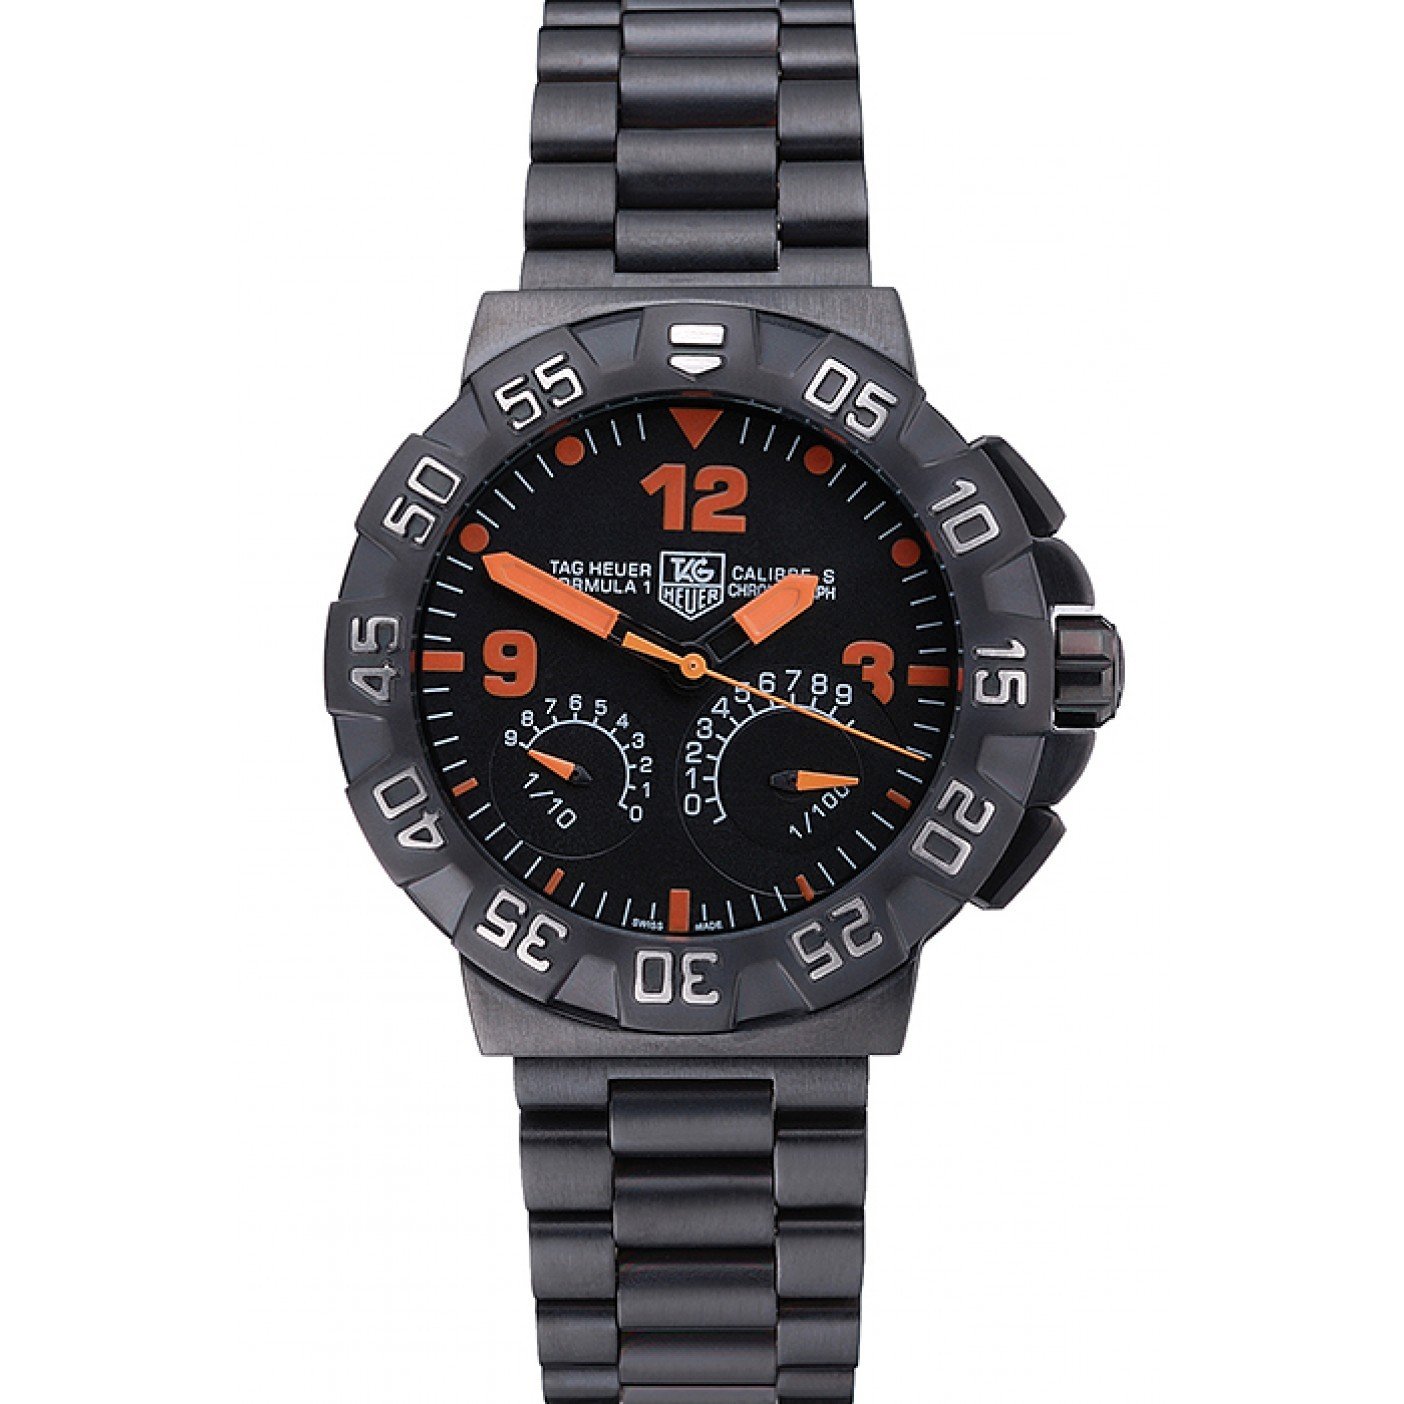 Tag Heuer Formula One Calibre S Black Dial Orange Numerals Ion Plated Steinless Steel Bracelet 622300